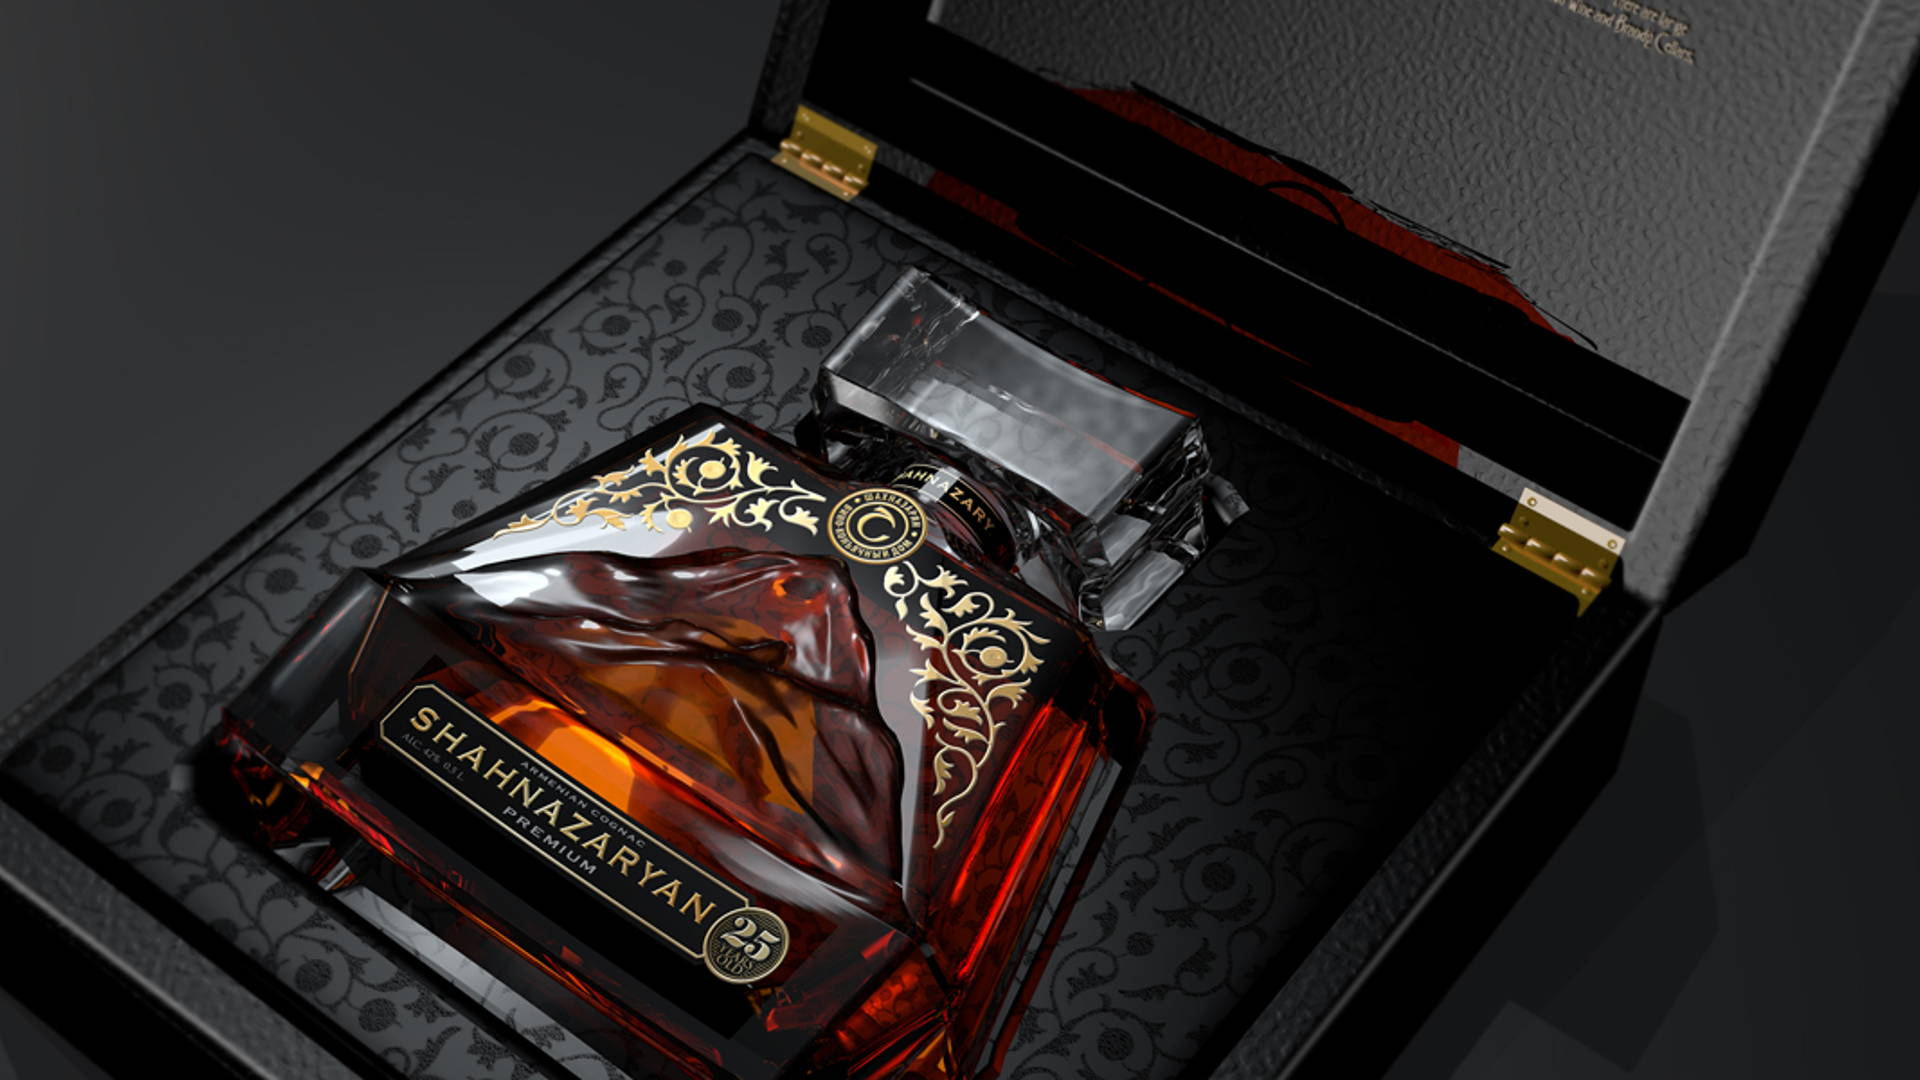 Featured image for "Shahnazaryan" - premium cognac 25 years of aging